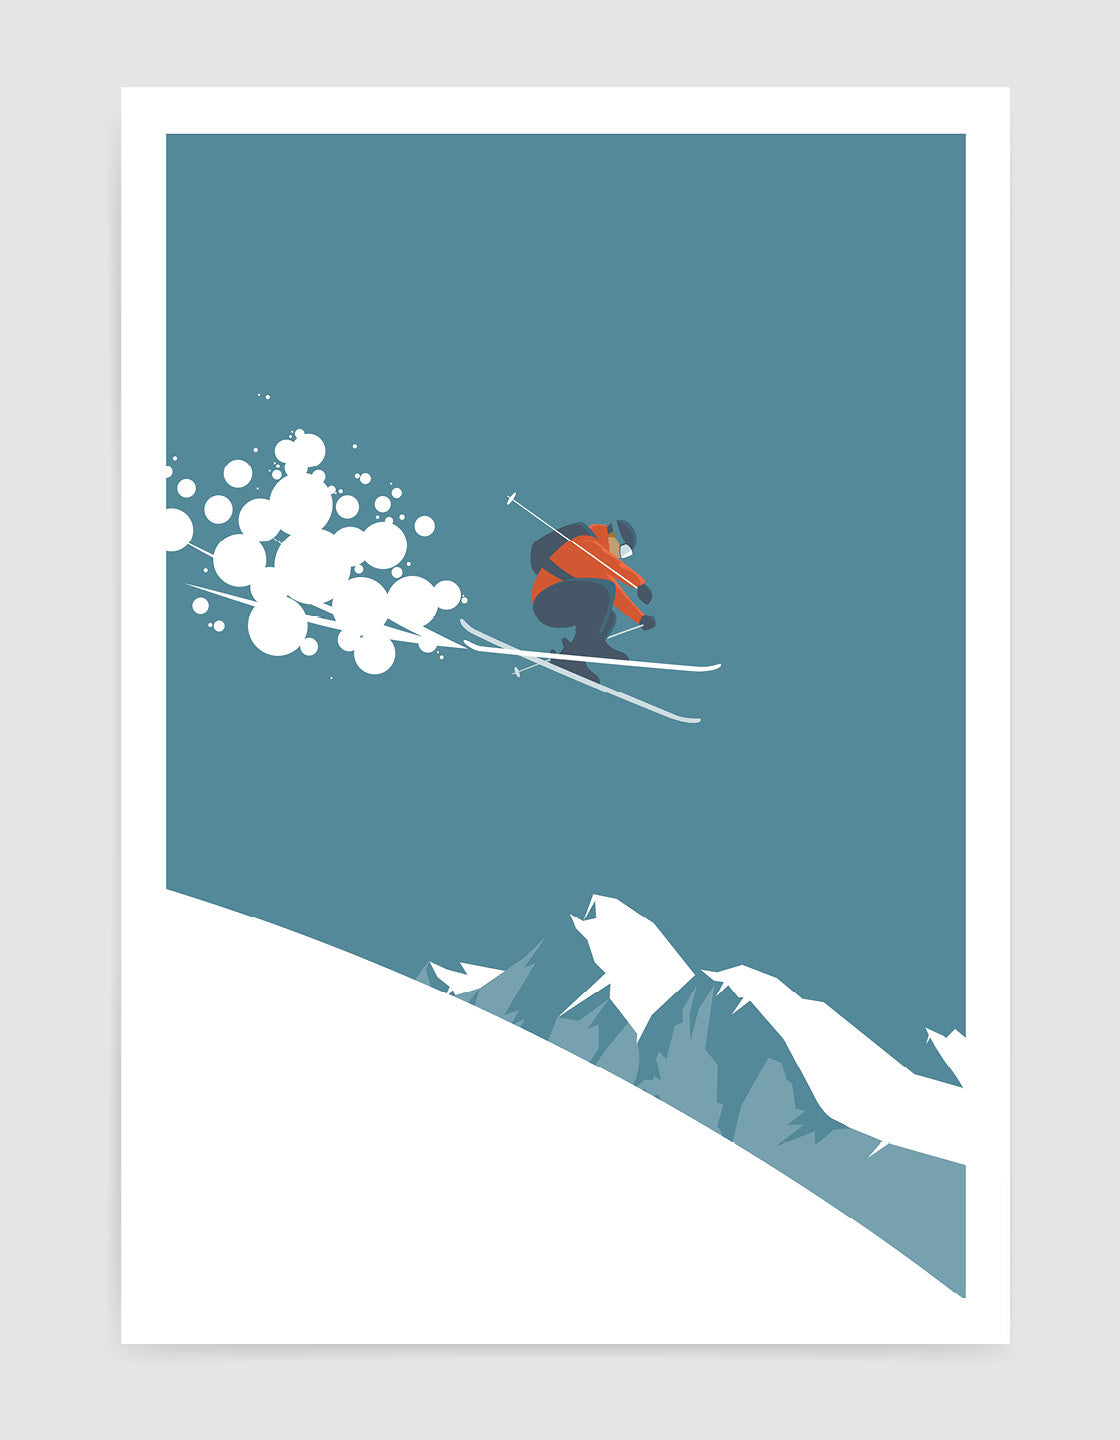 Skier in the air